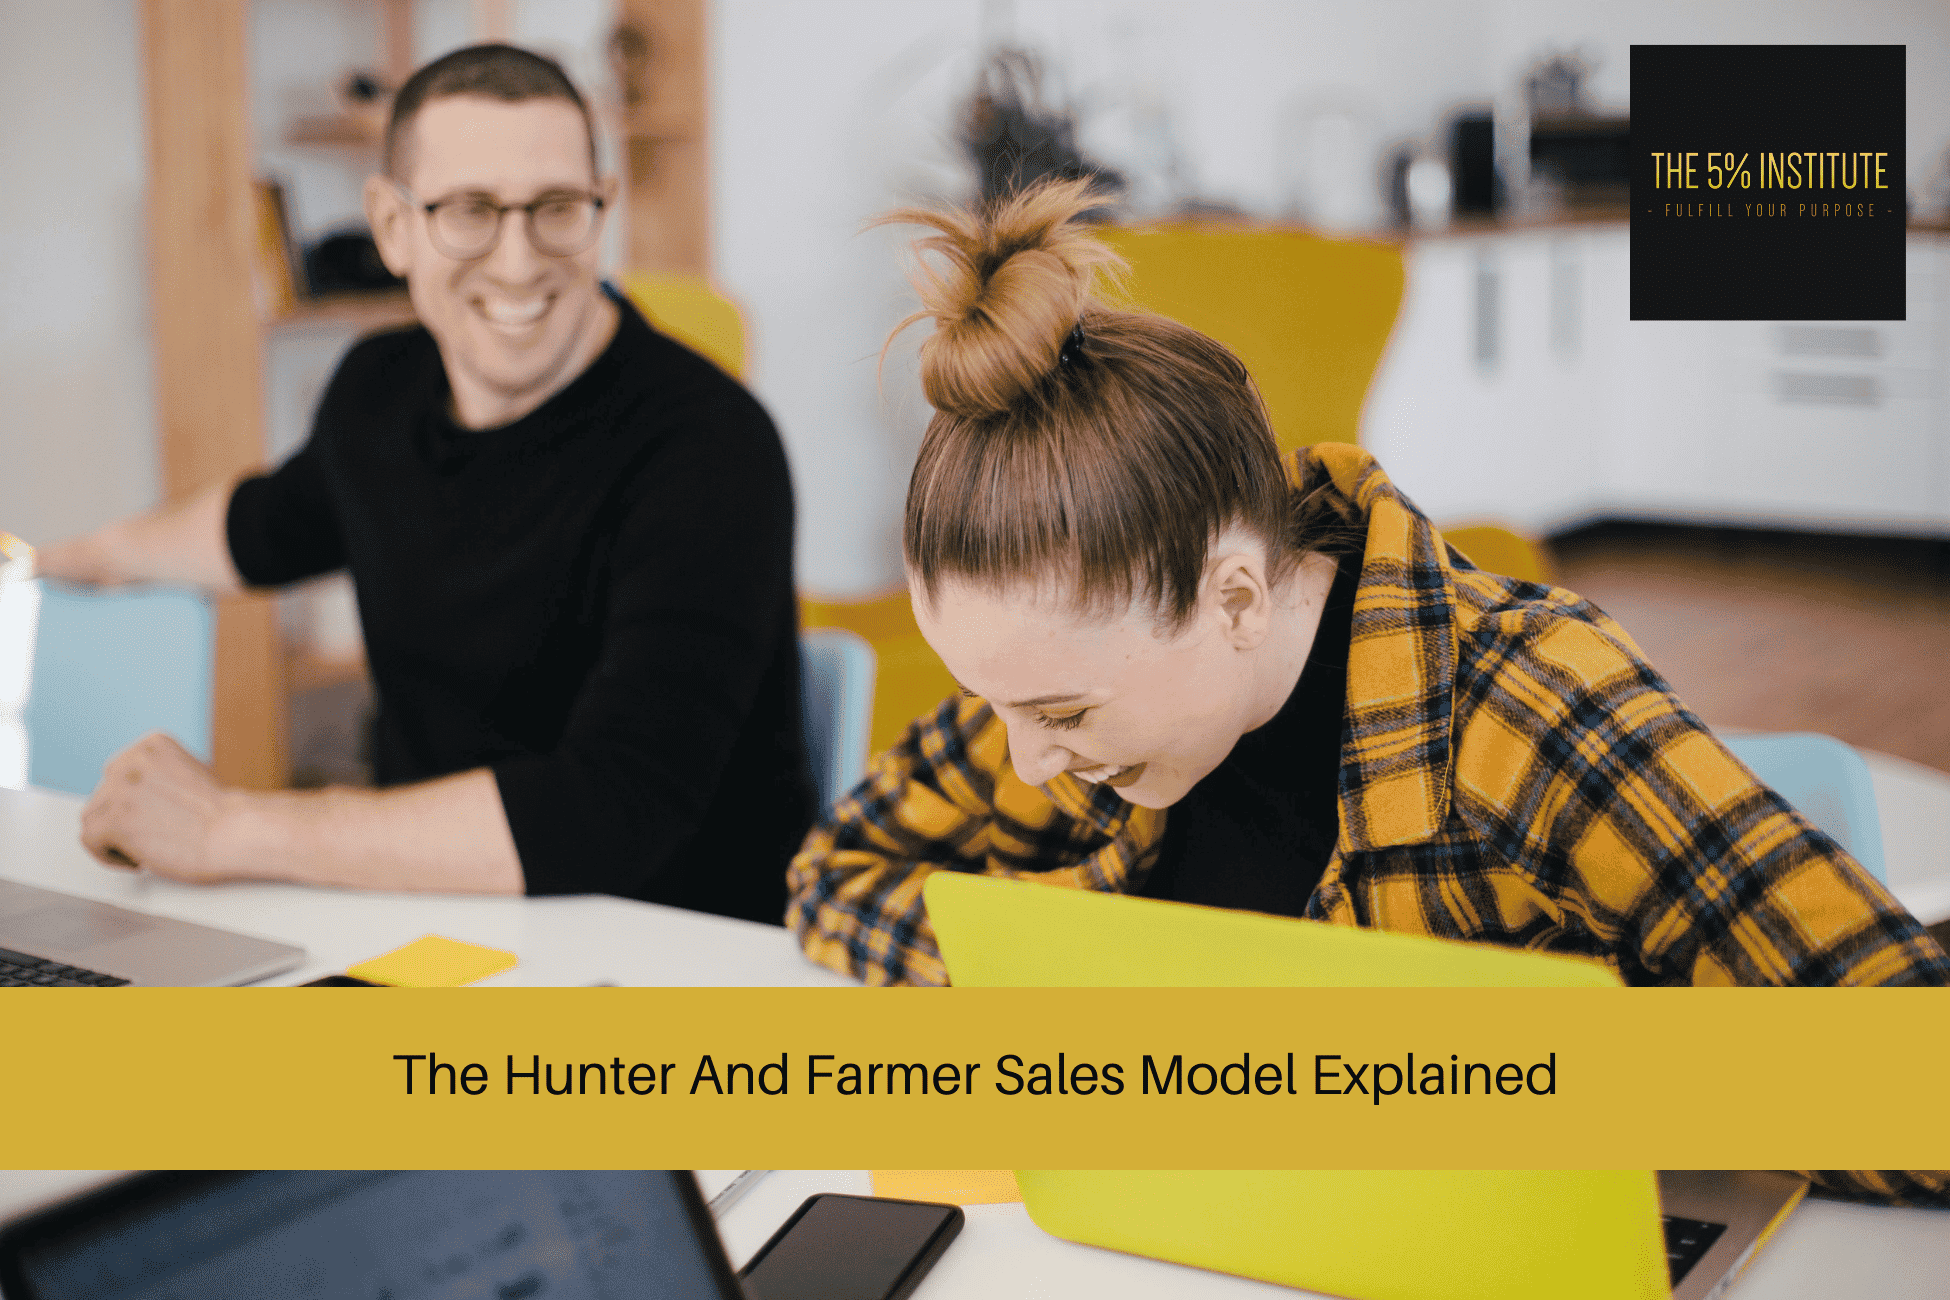 The Hunter And Farmer Sales Model Explained